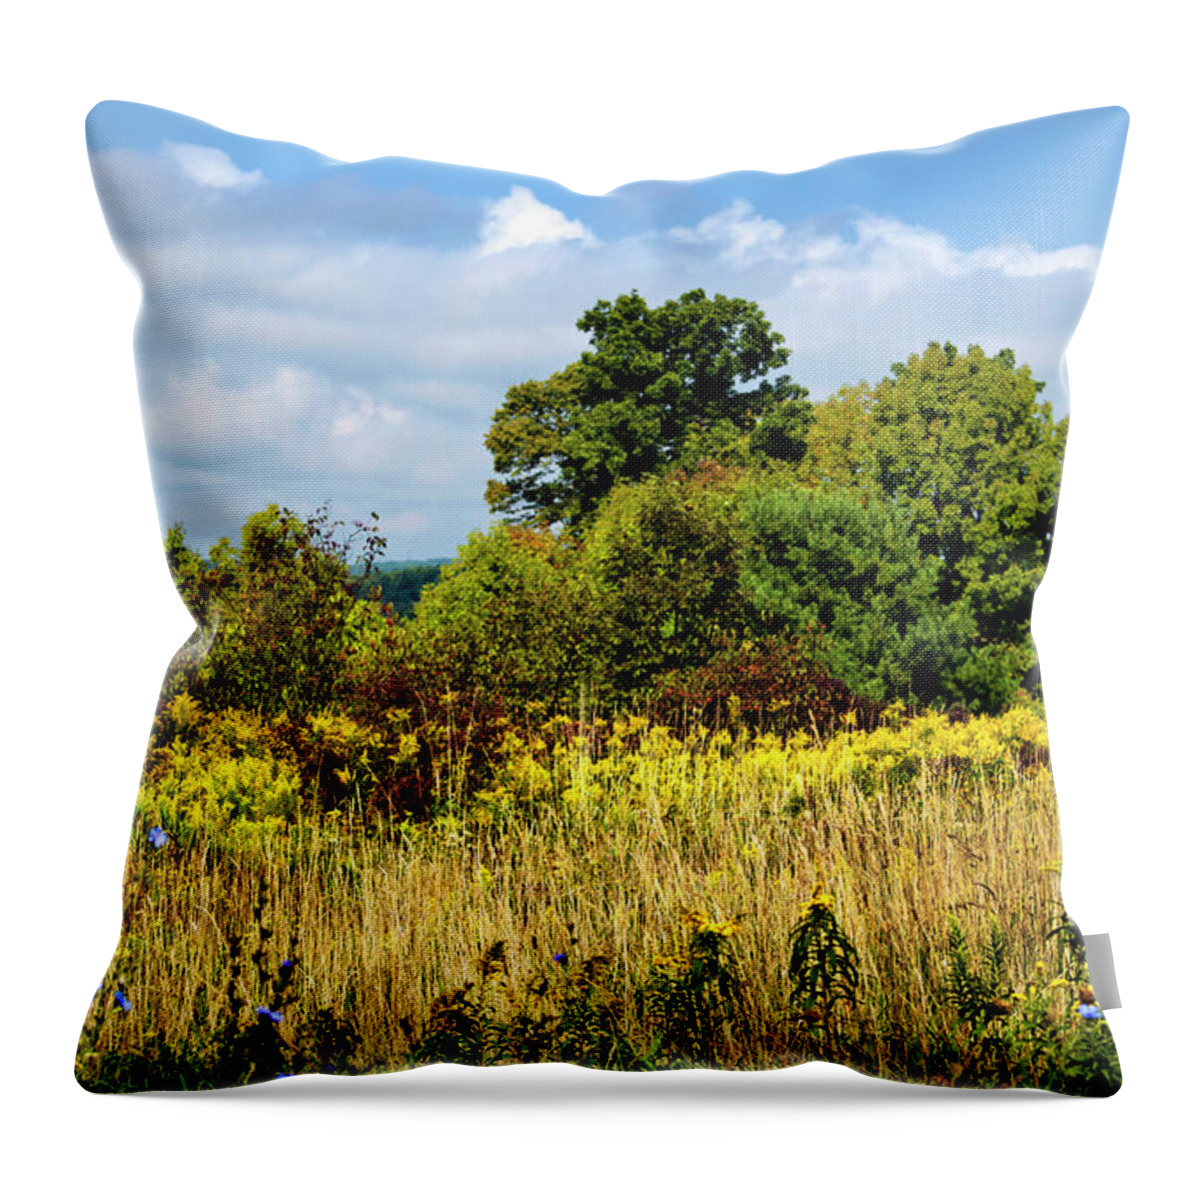 New York Throw Pillow featuring the photograph New York September by Christina Rollo